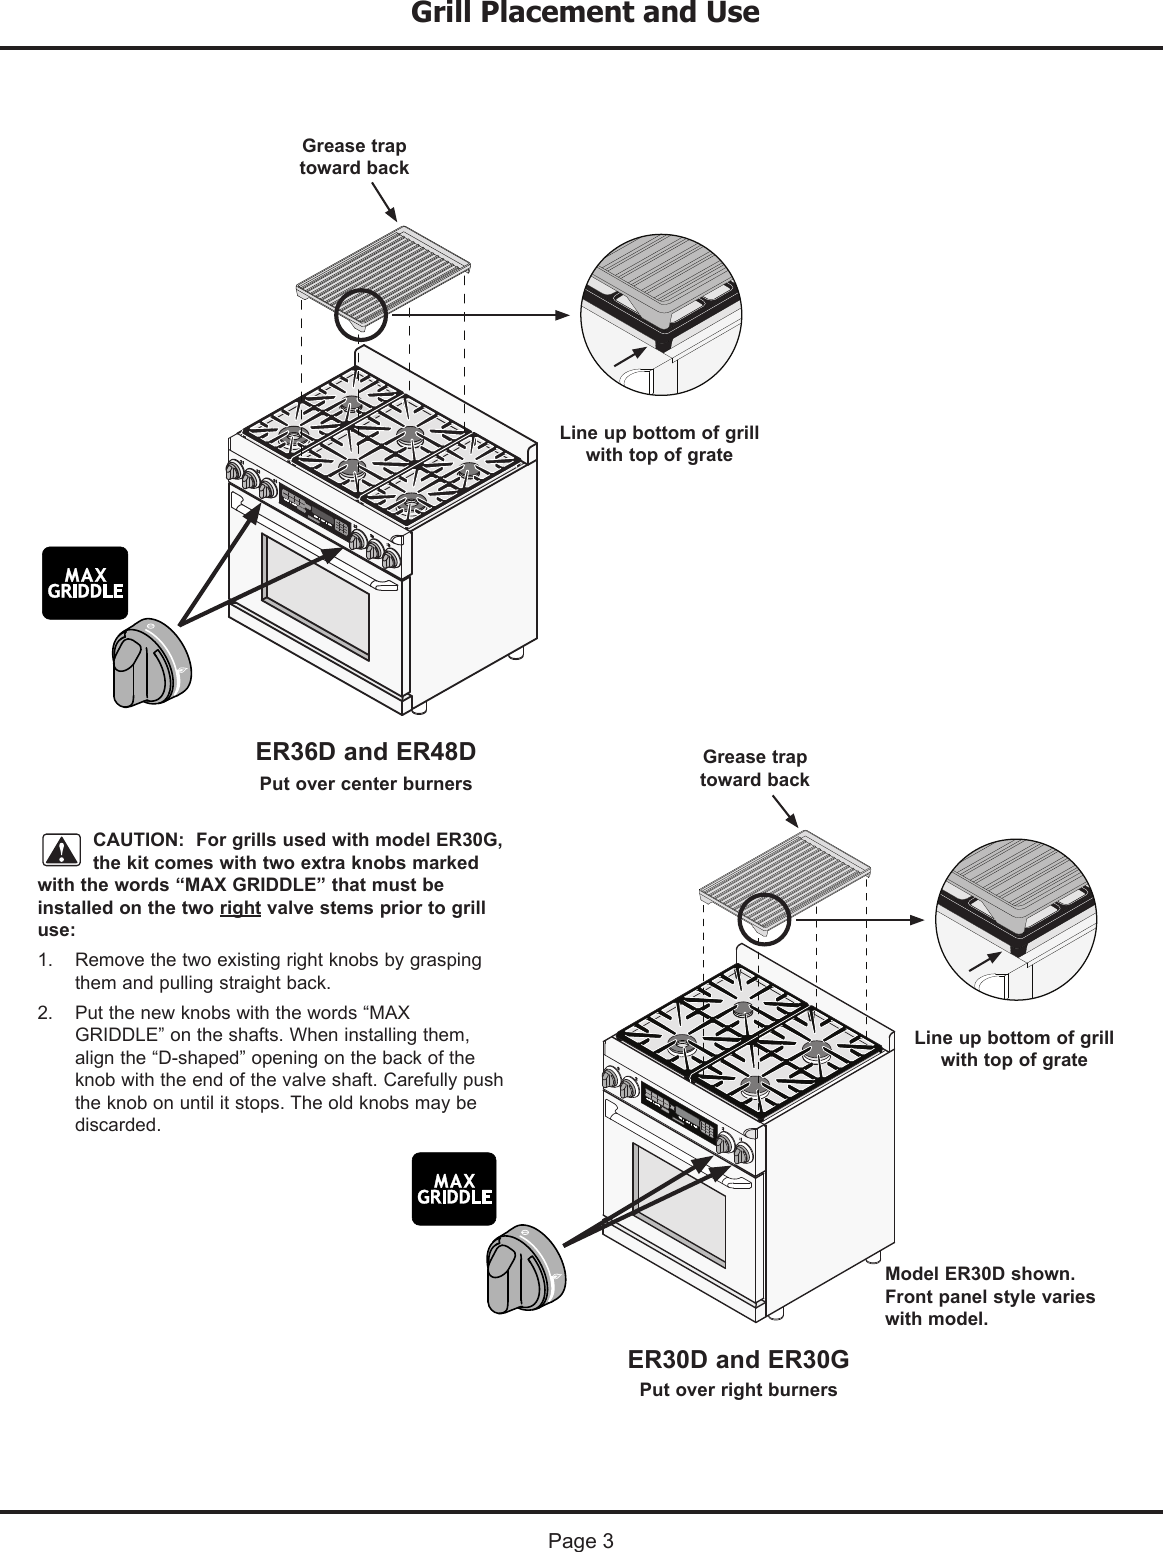 Page 3 of 4 - Dacor Dacor-Epicure-Eg366-Users-Manual-  Dacor-epicure-eg366-users-manual